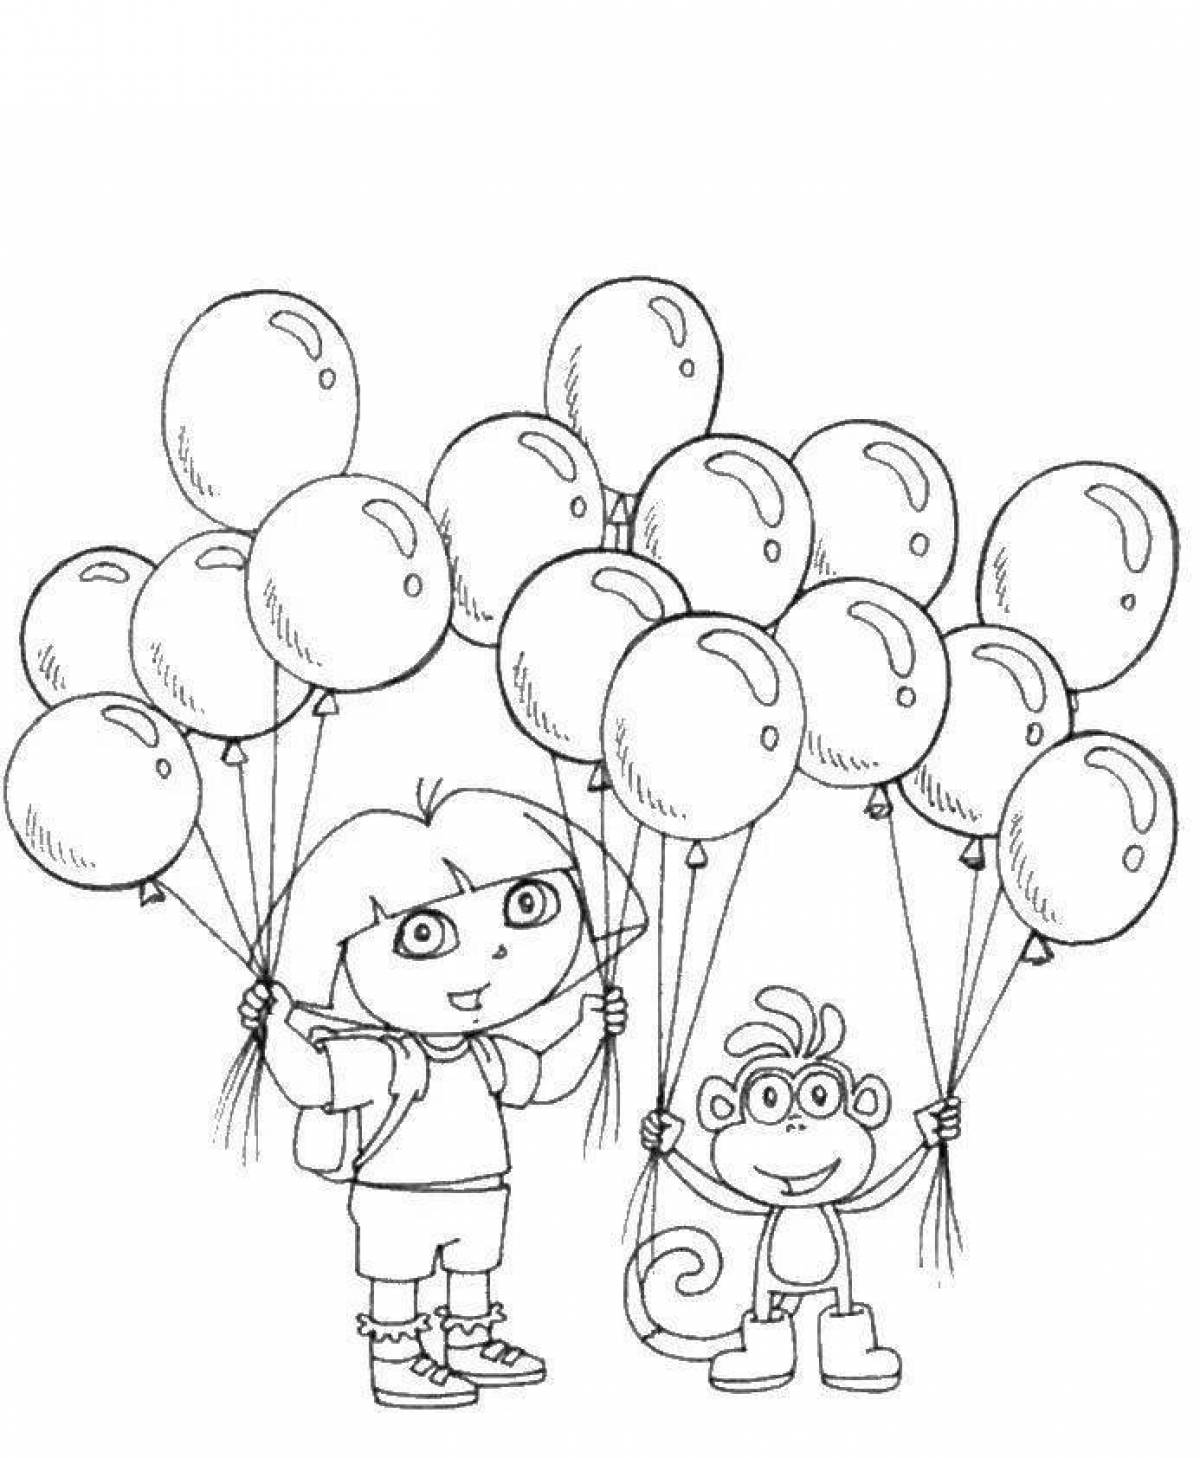 Violent coloring girl with balloons